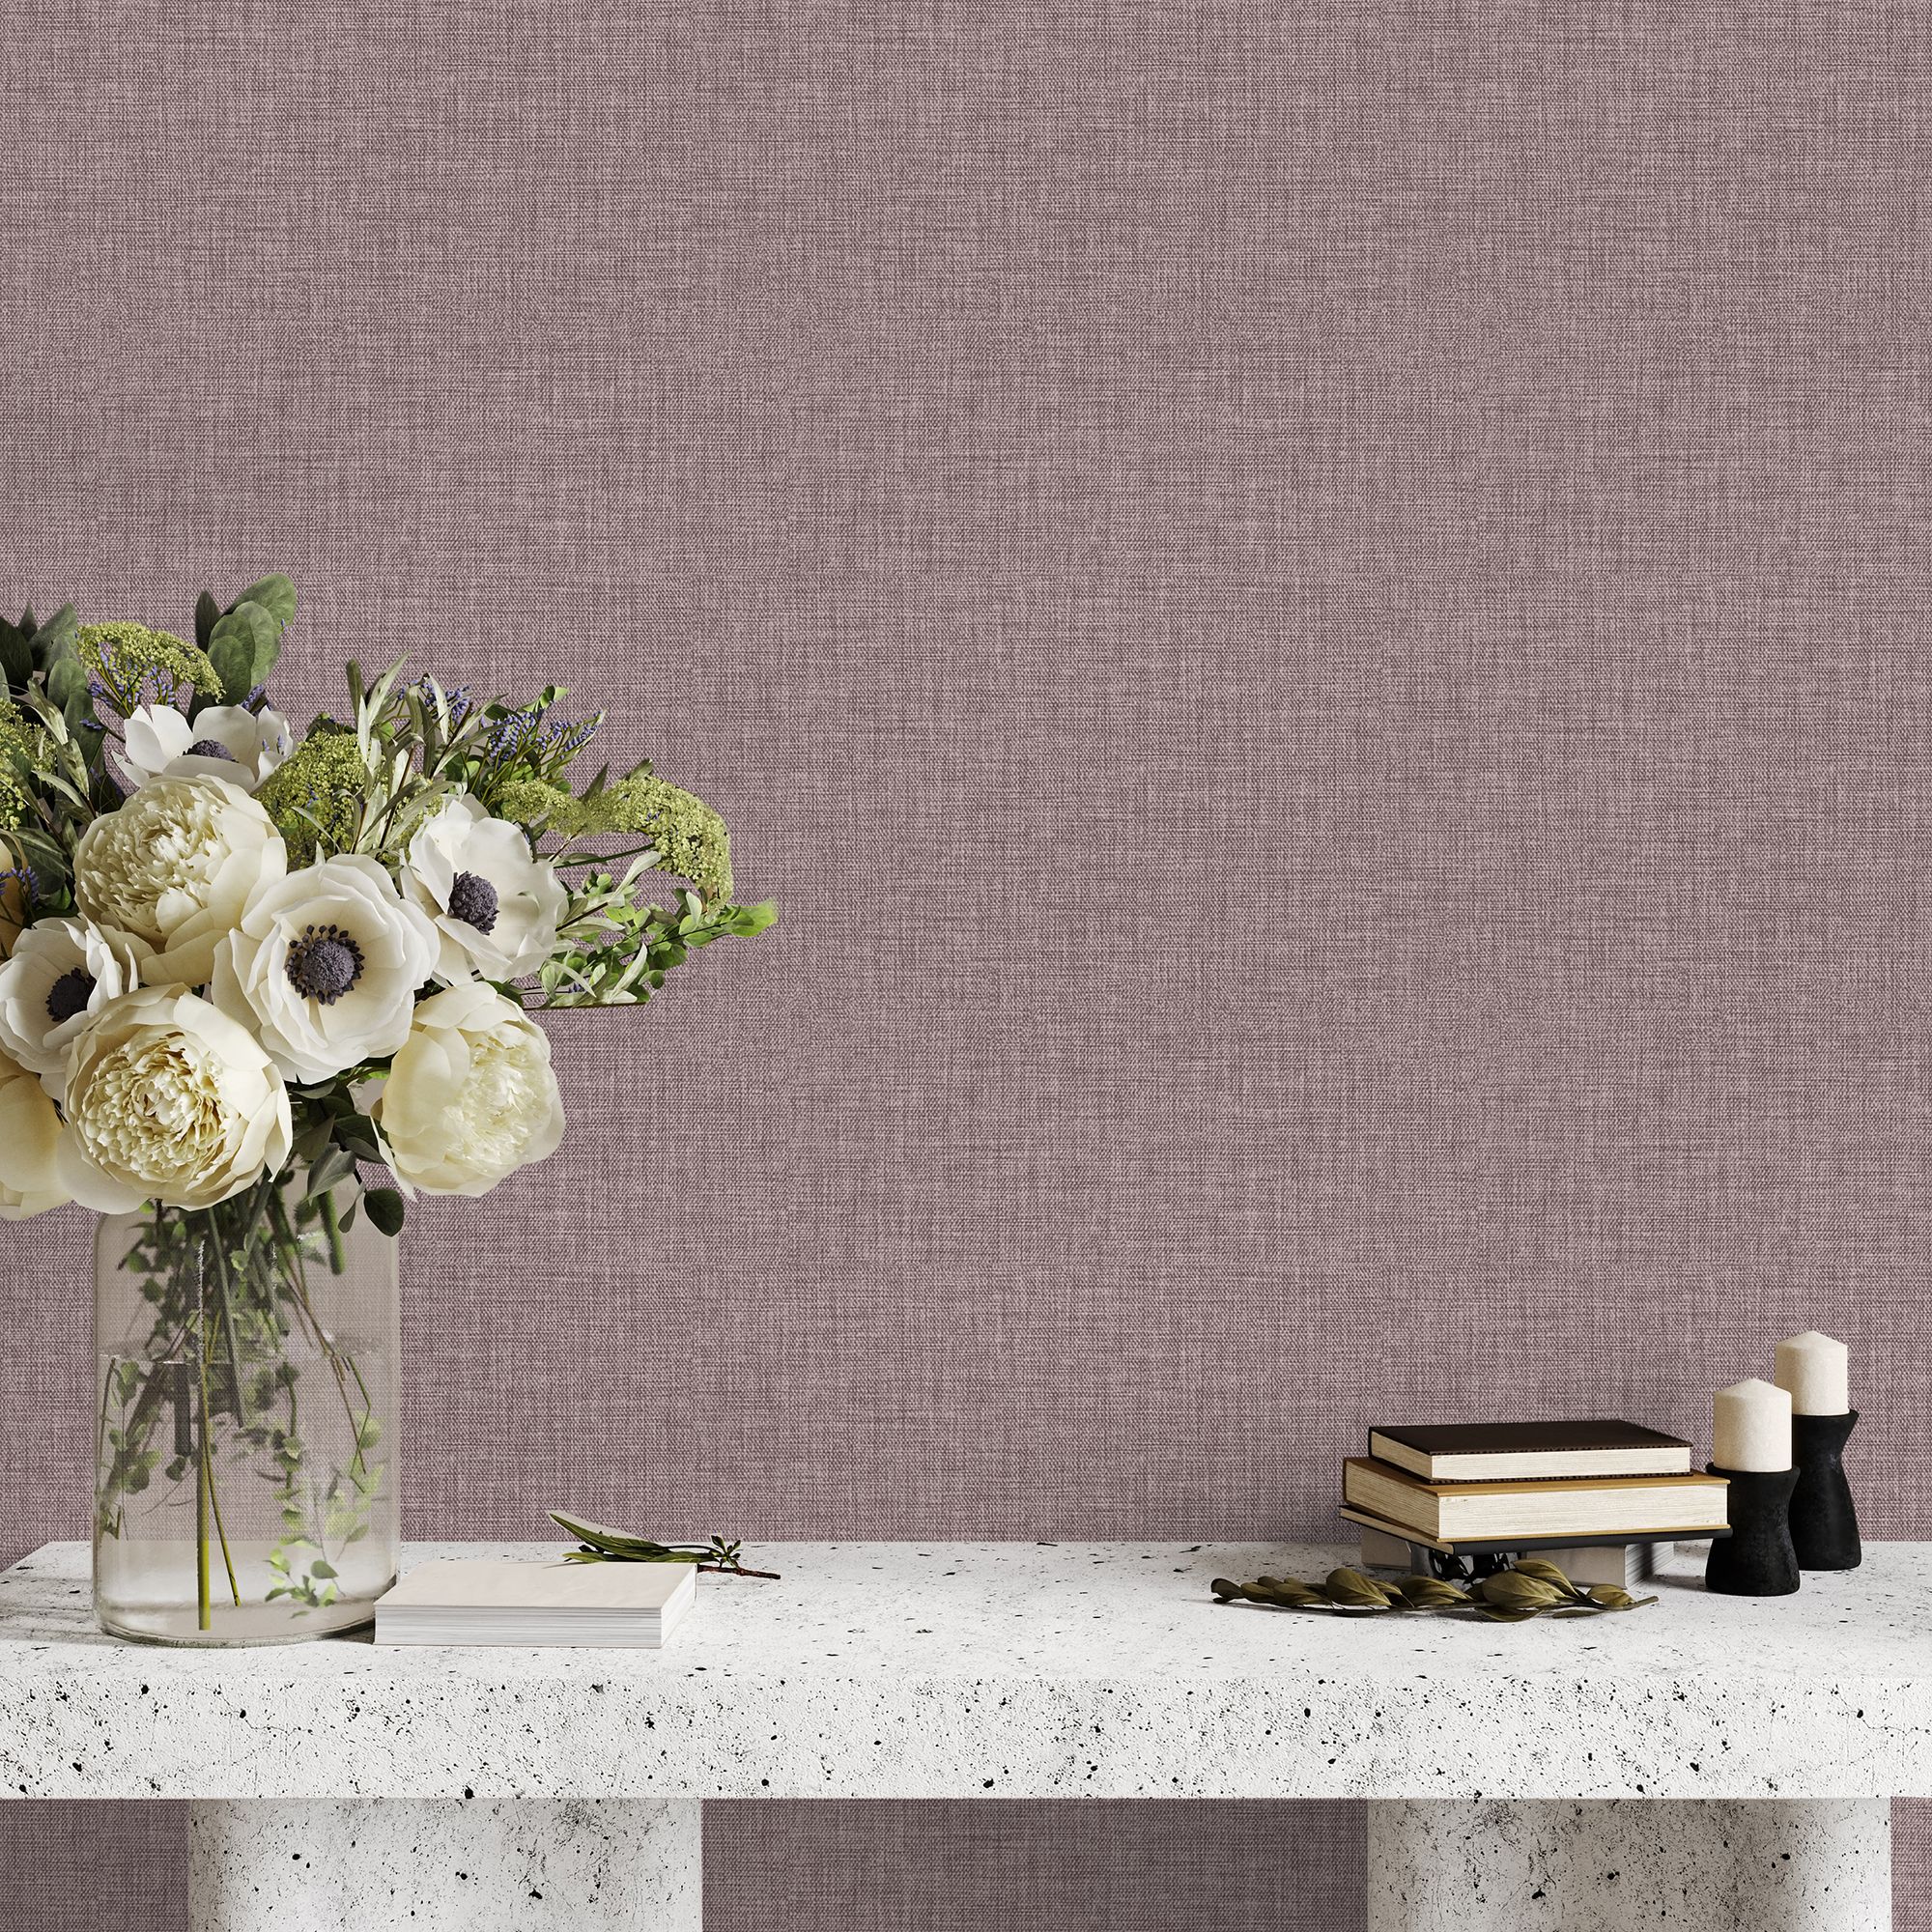 GoodHome Shung Mulberry Woven effect Textured Wallpaper